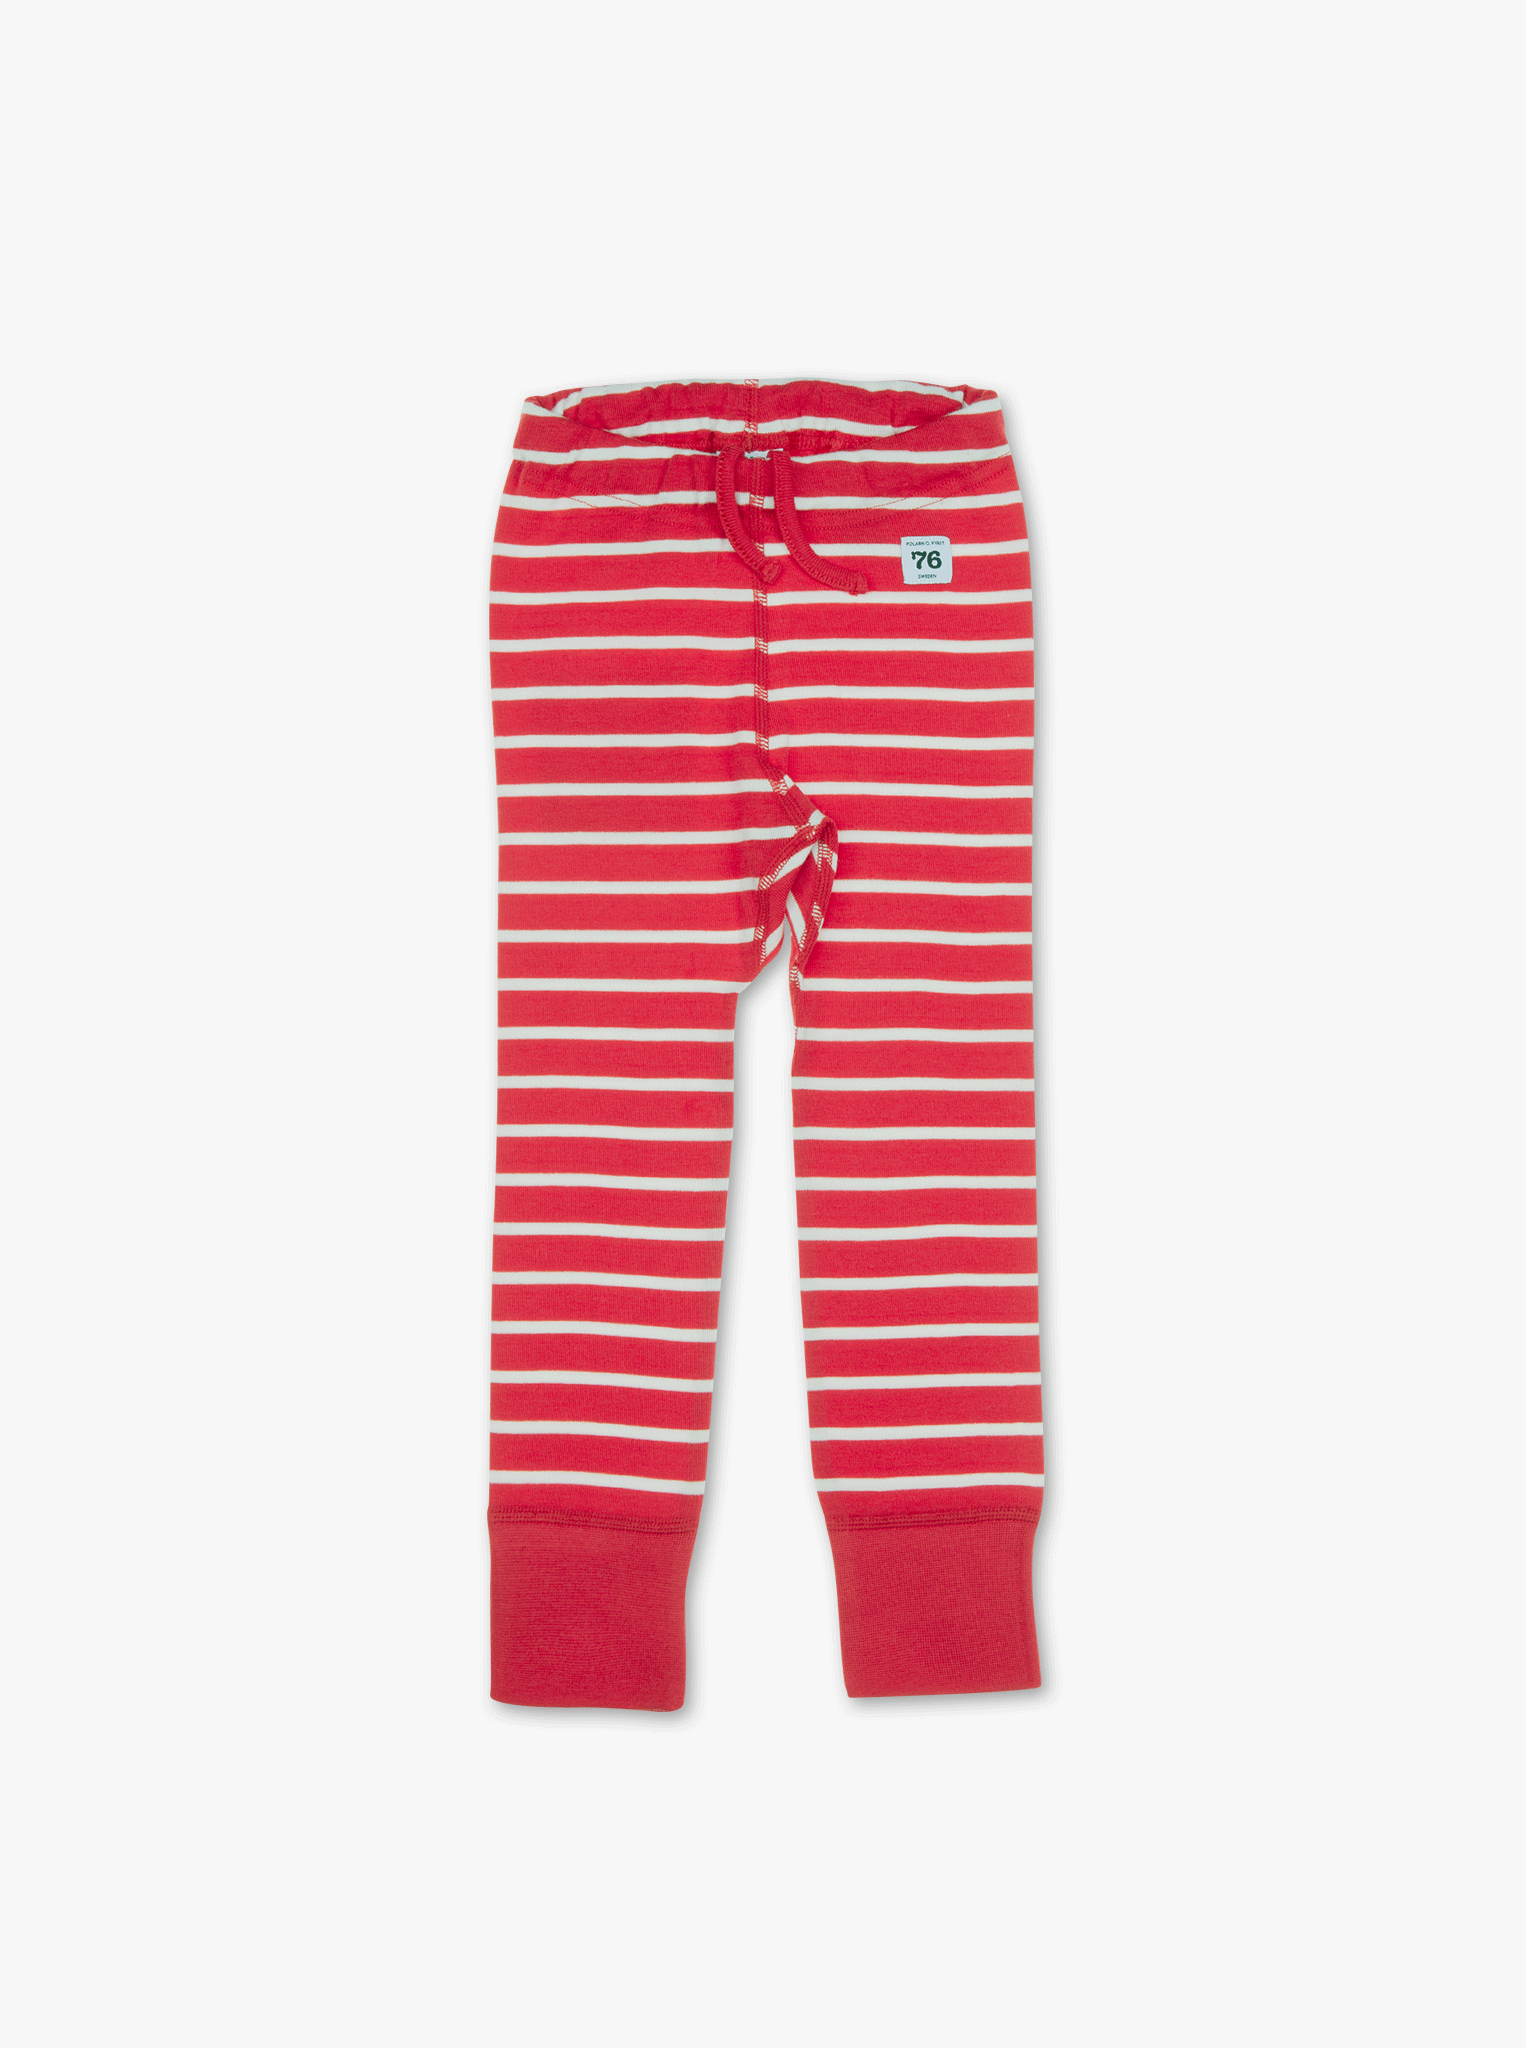 red and white stripes baby leggings, ethical organic cotton, long lasting polarn o. pyret quality